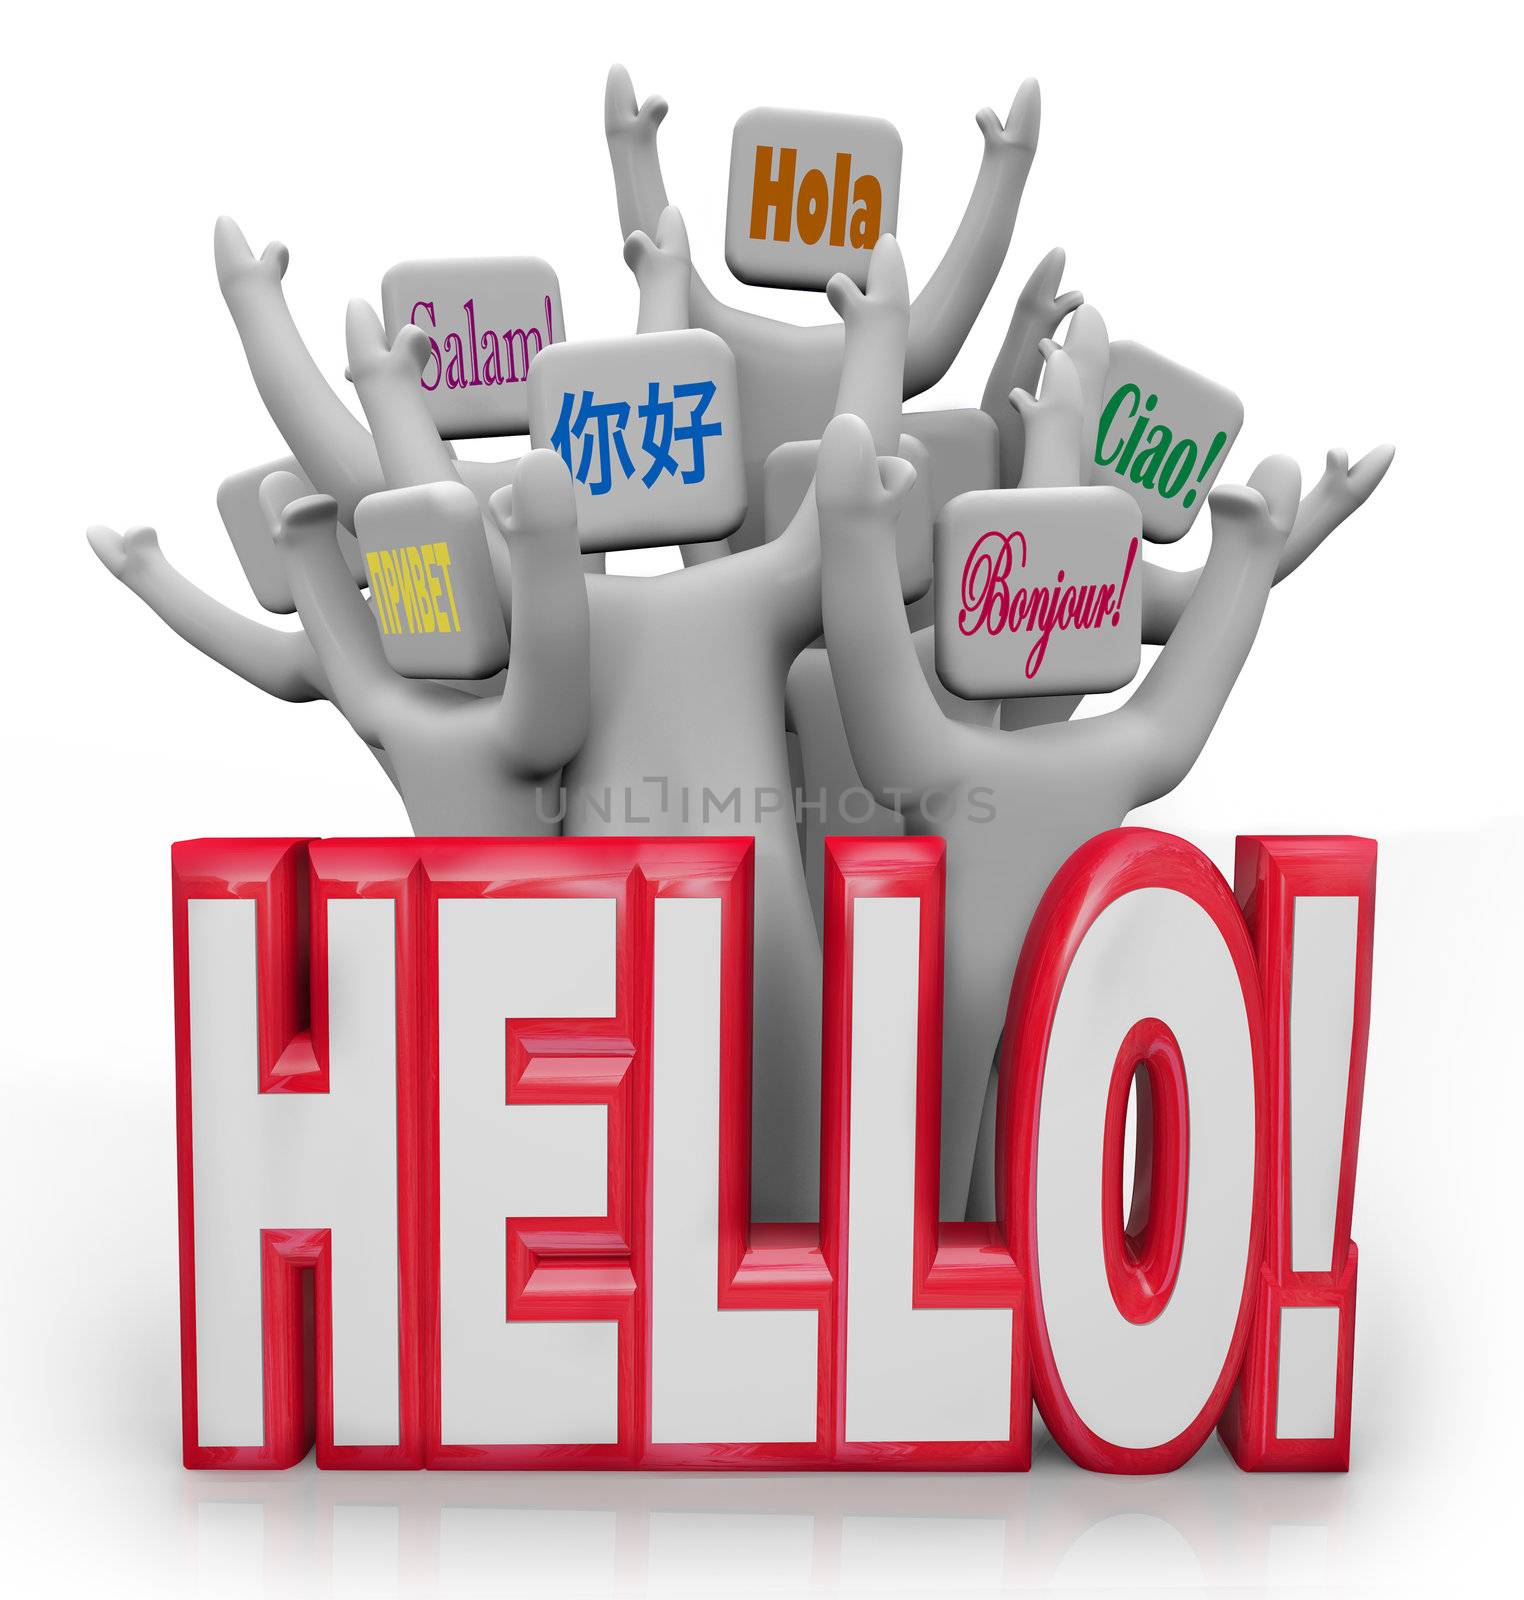 Several people greet each other with the word Hello spoken in different international languages from around the world, with the words ciao, bonjour, hola and more